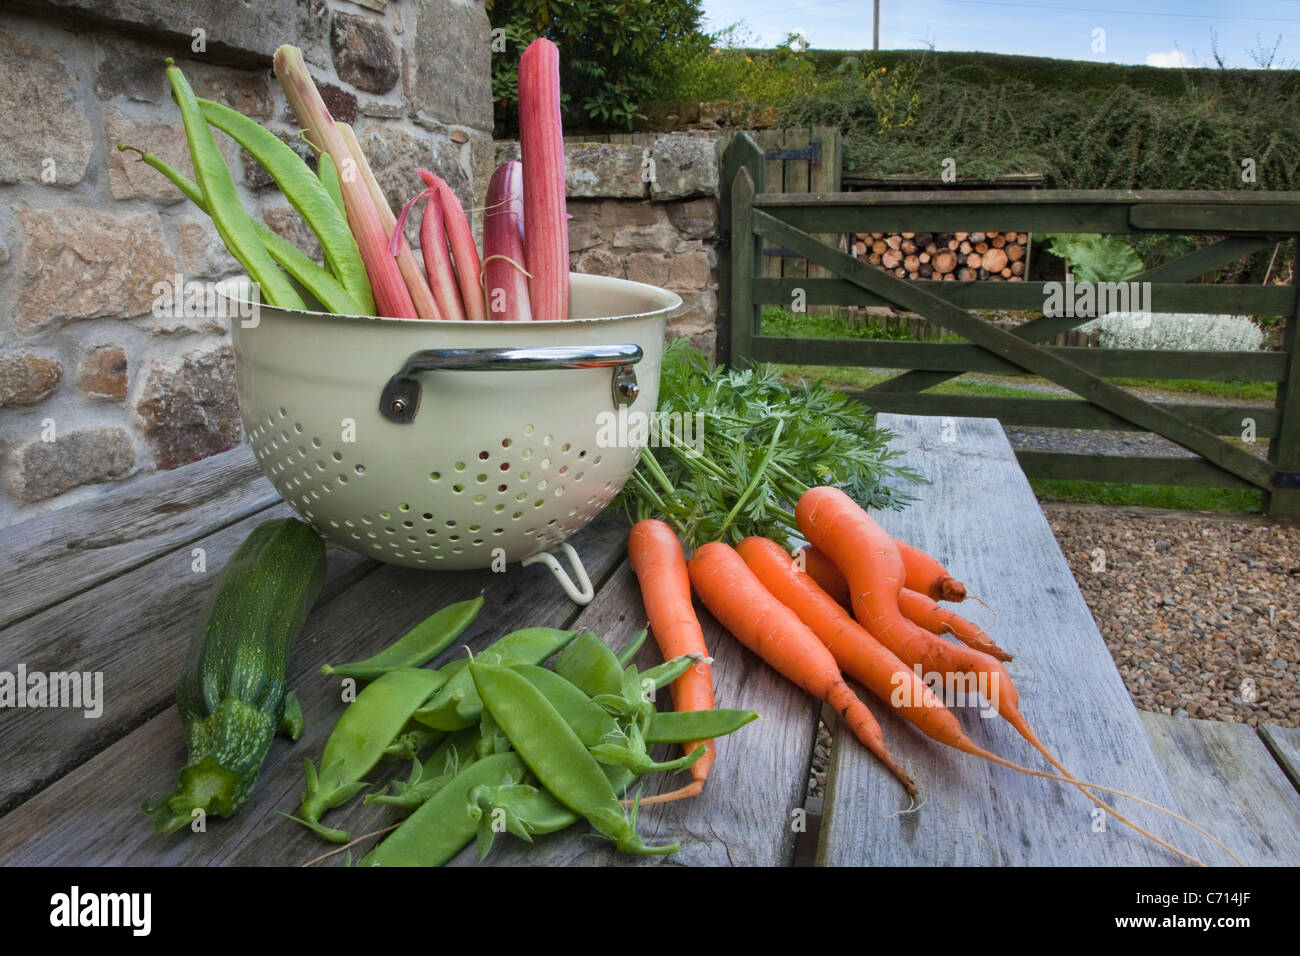 Organic vegetables grown on the allotment, UK Stock Photo